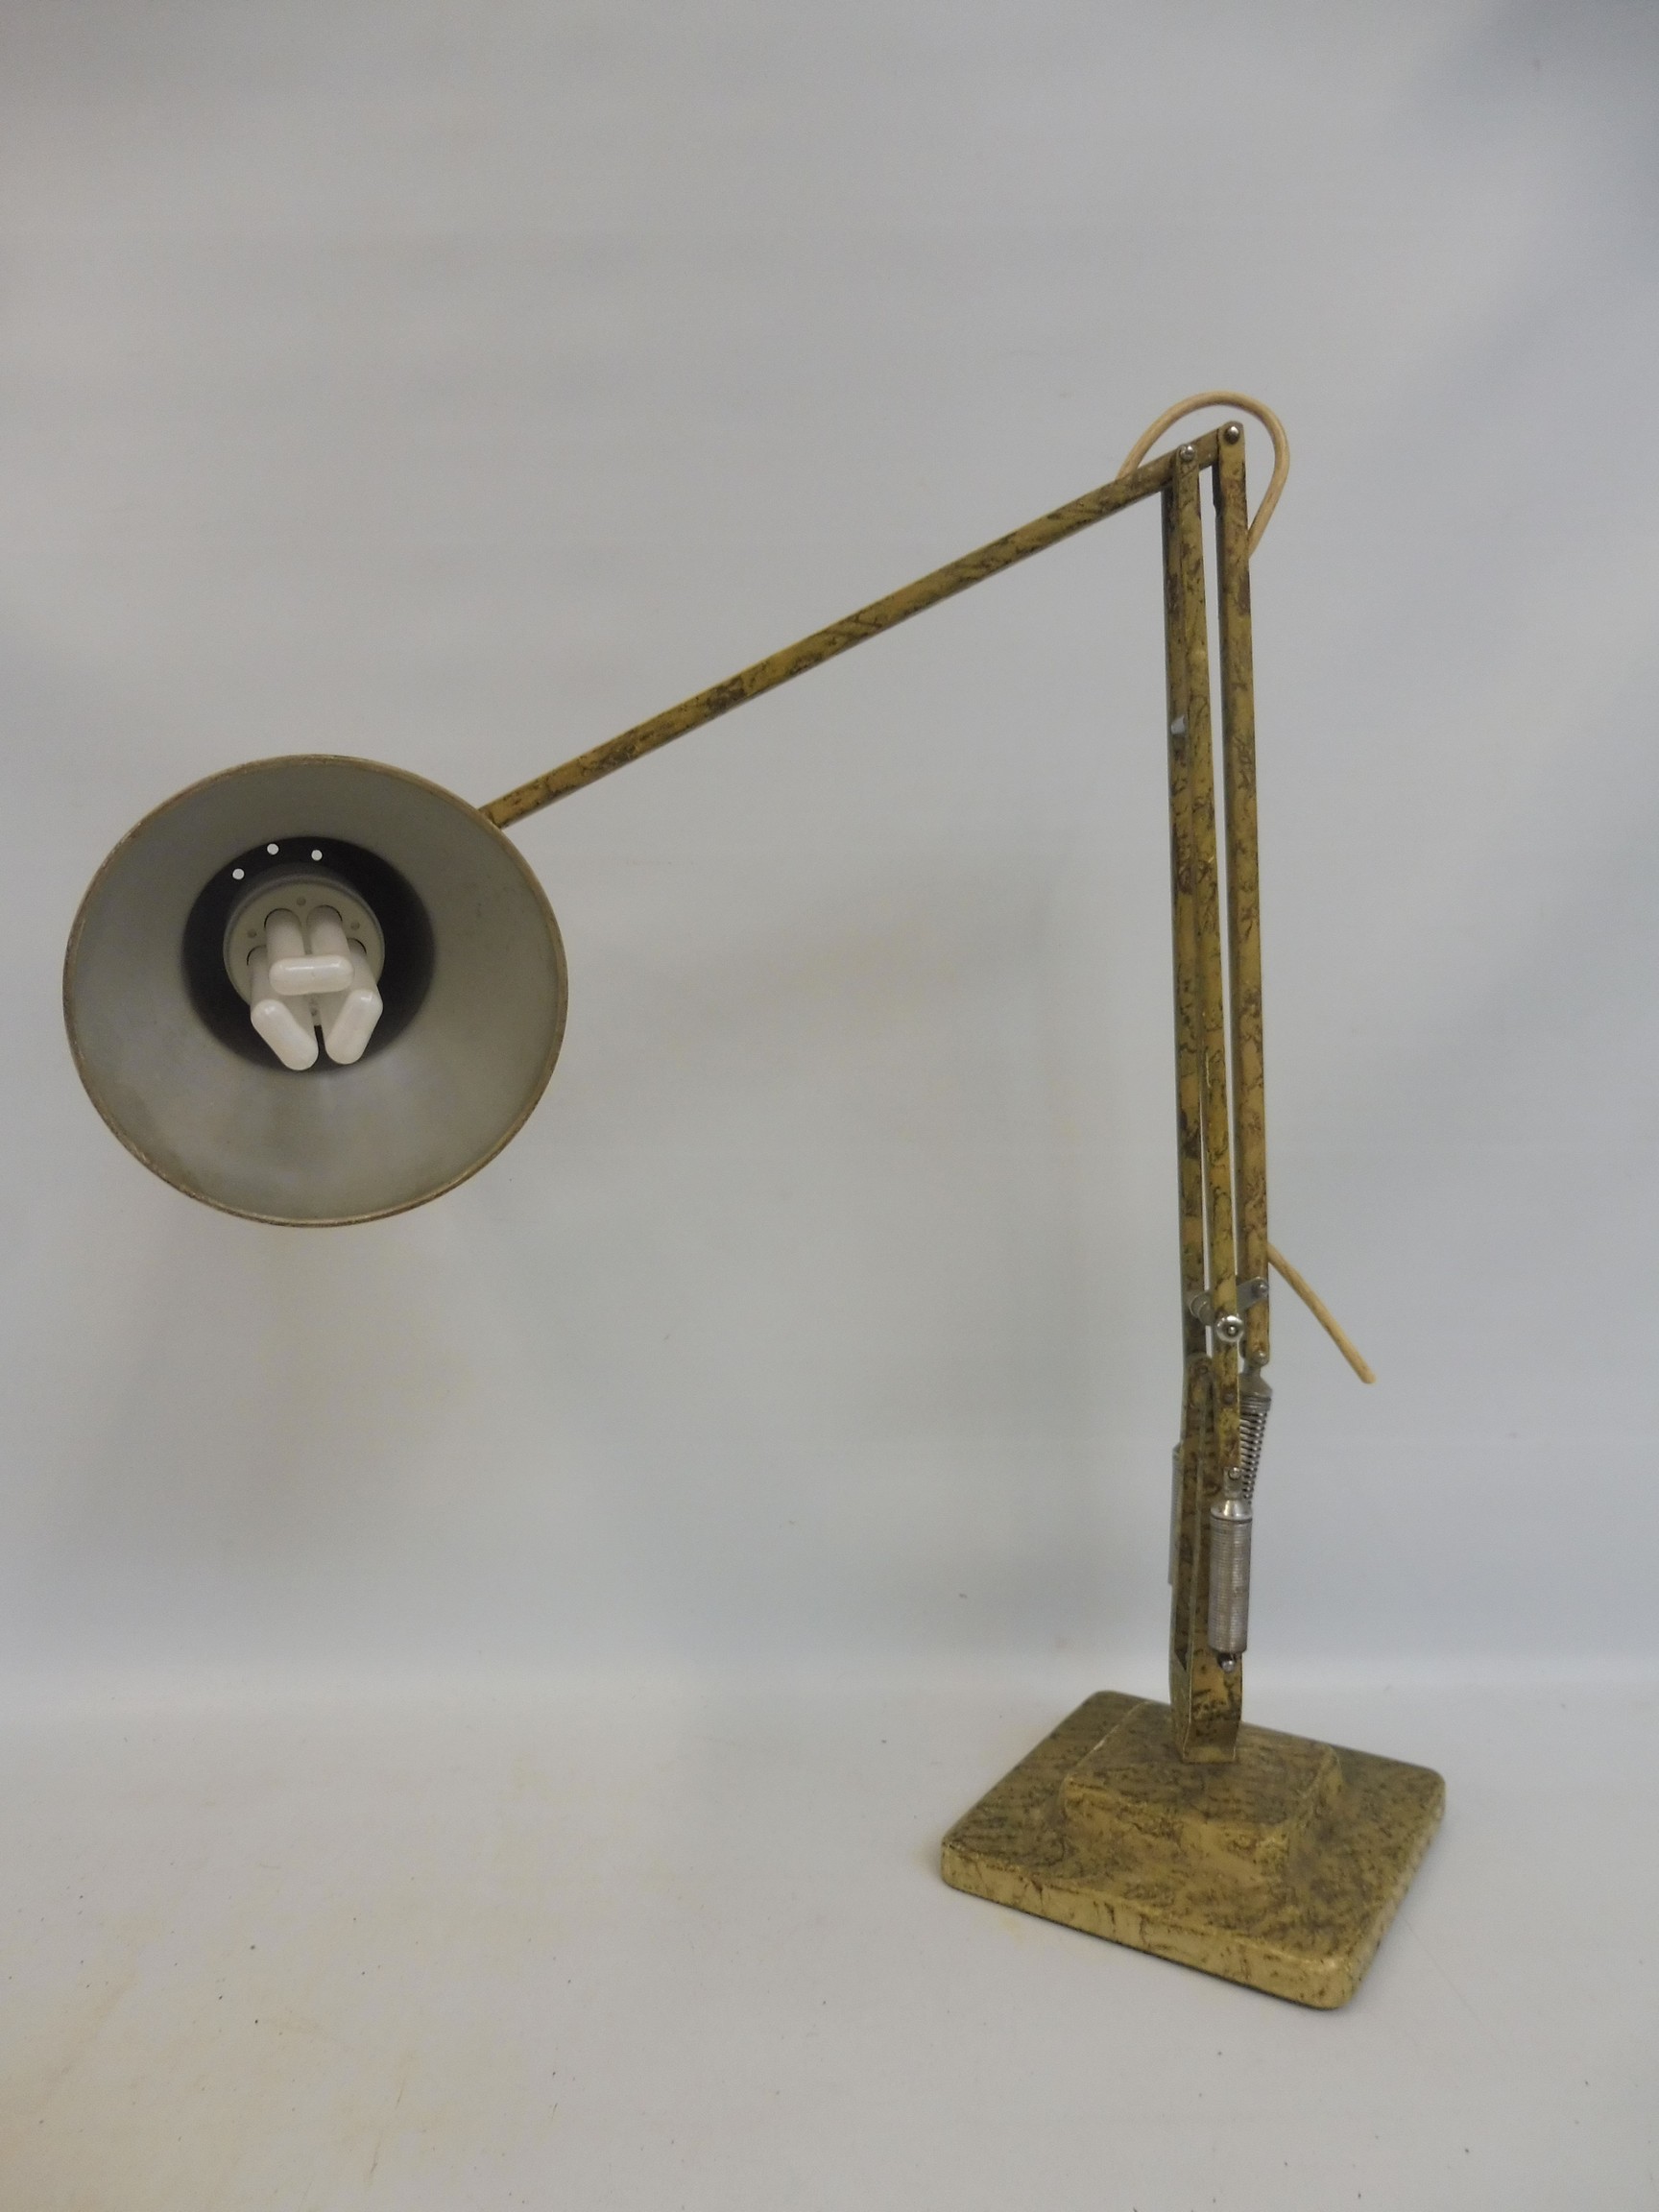 A 1970s angle poise lamp with mottled finish.